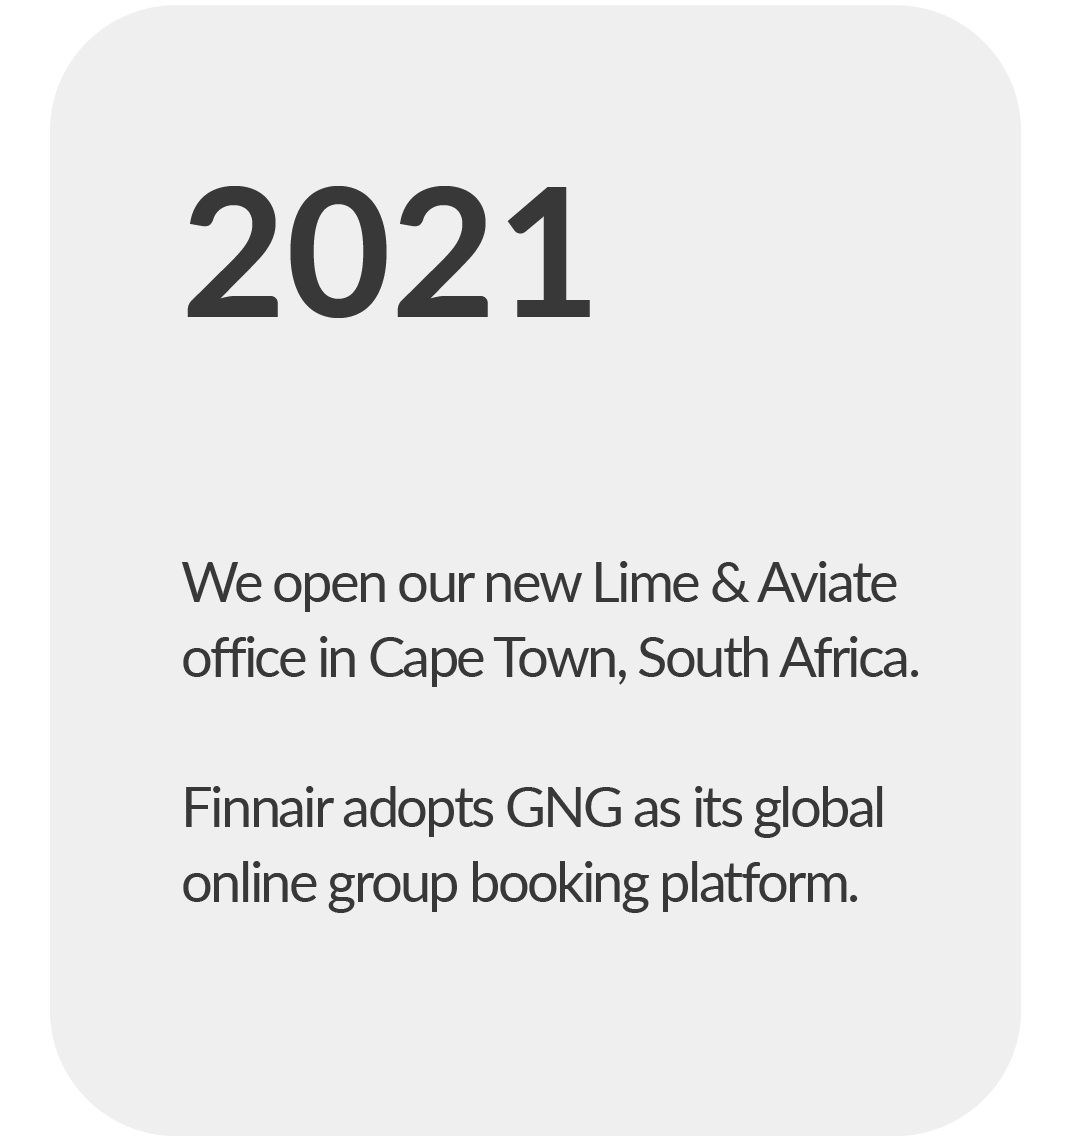 travel innovation group south africa